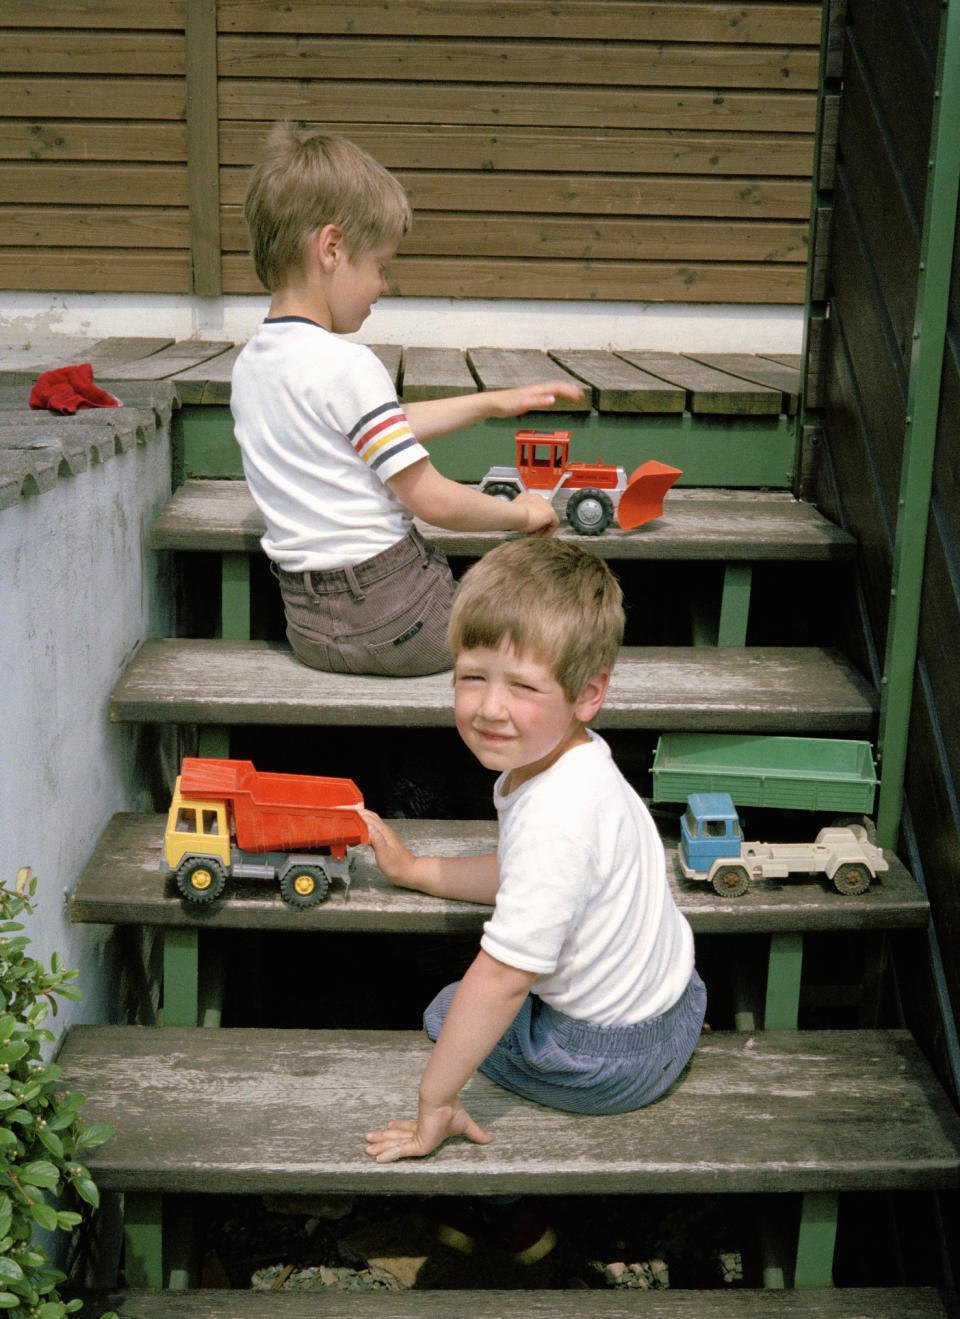 Two children are playing with toy trucks on wooden outdoor stairs